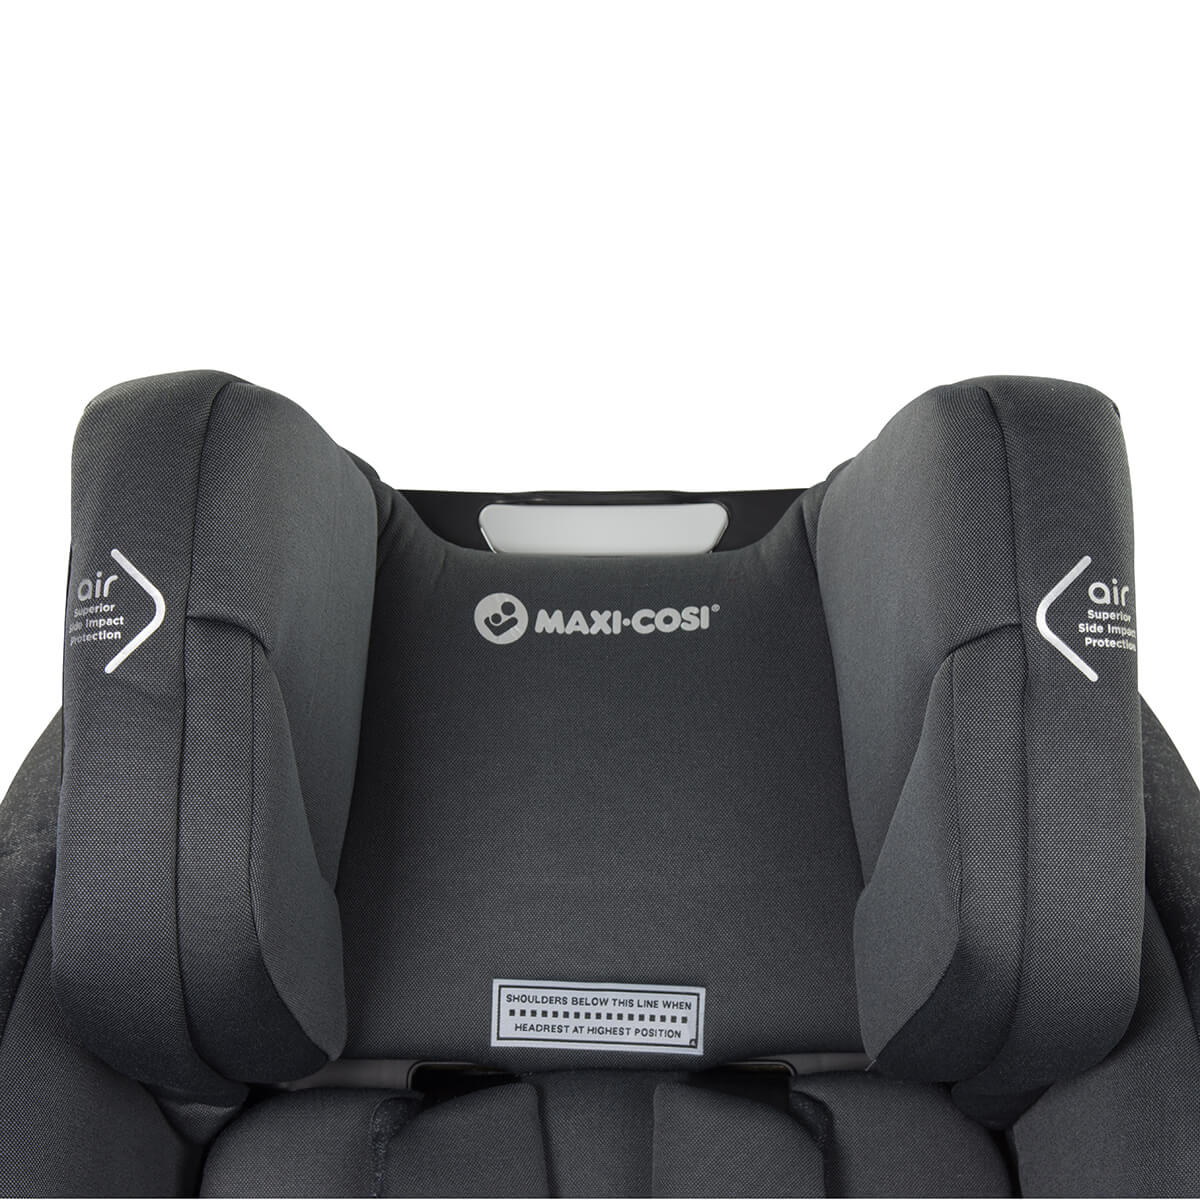 Headrest with airprotect technology for Maxi-Cosi Luna Pro Car Seat